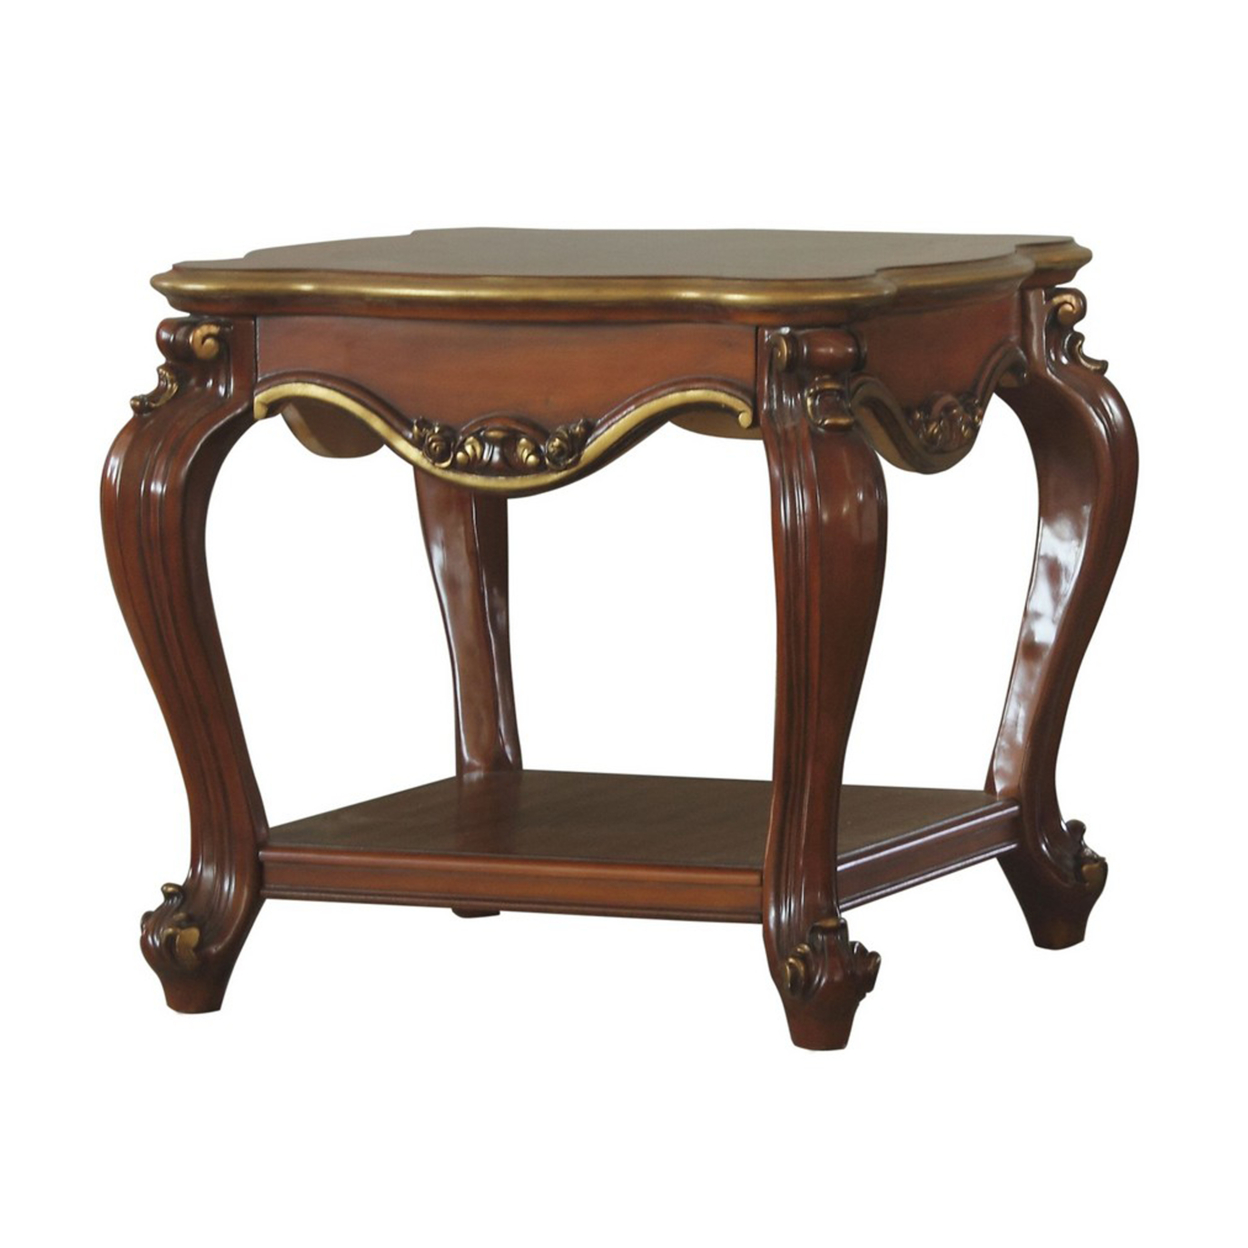 Wooden End Table With Open Bottom Shelf And Carved Details, Brown- Saltoro Sherpi